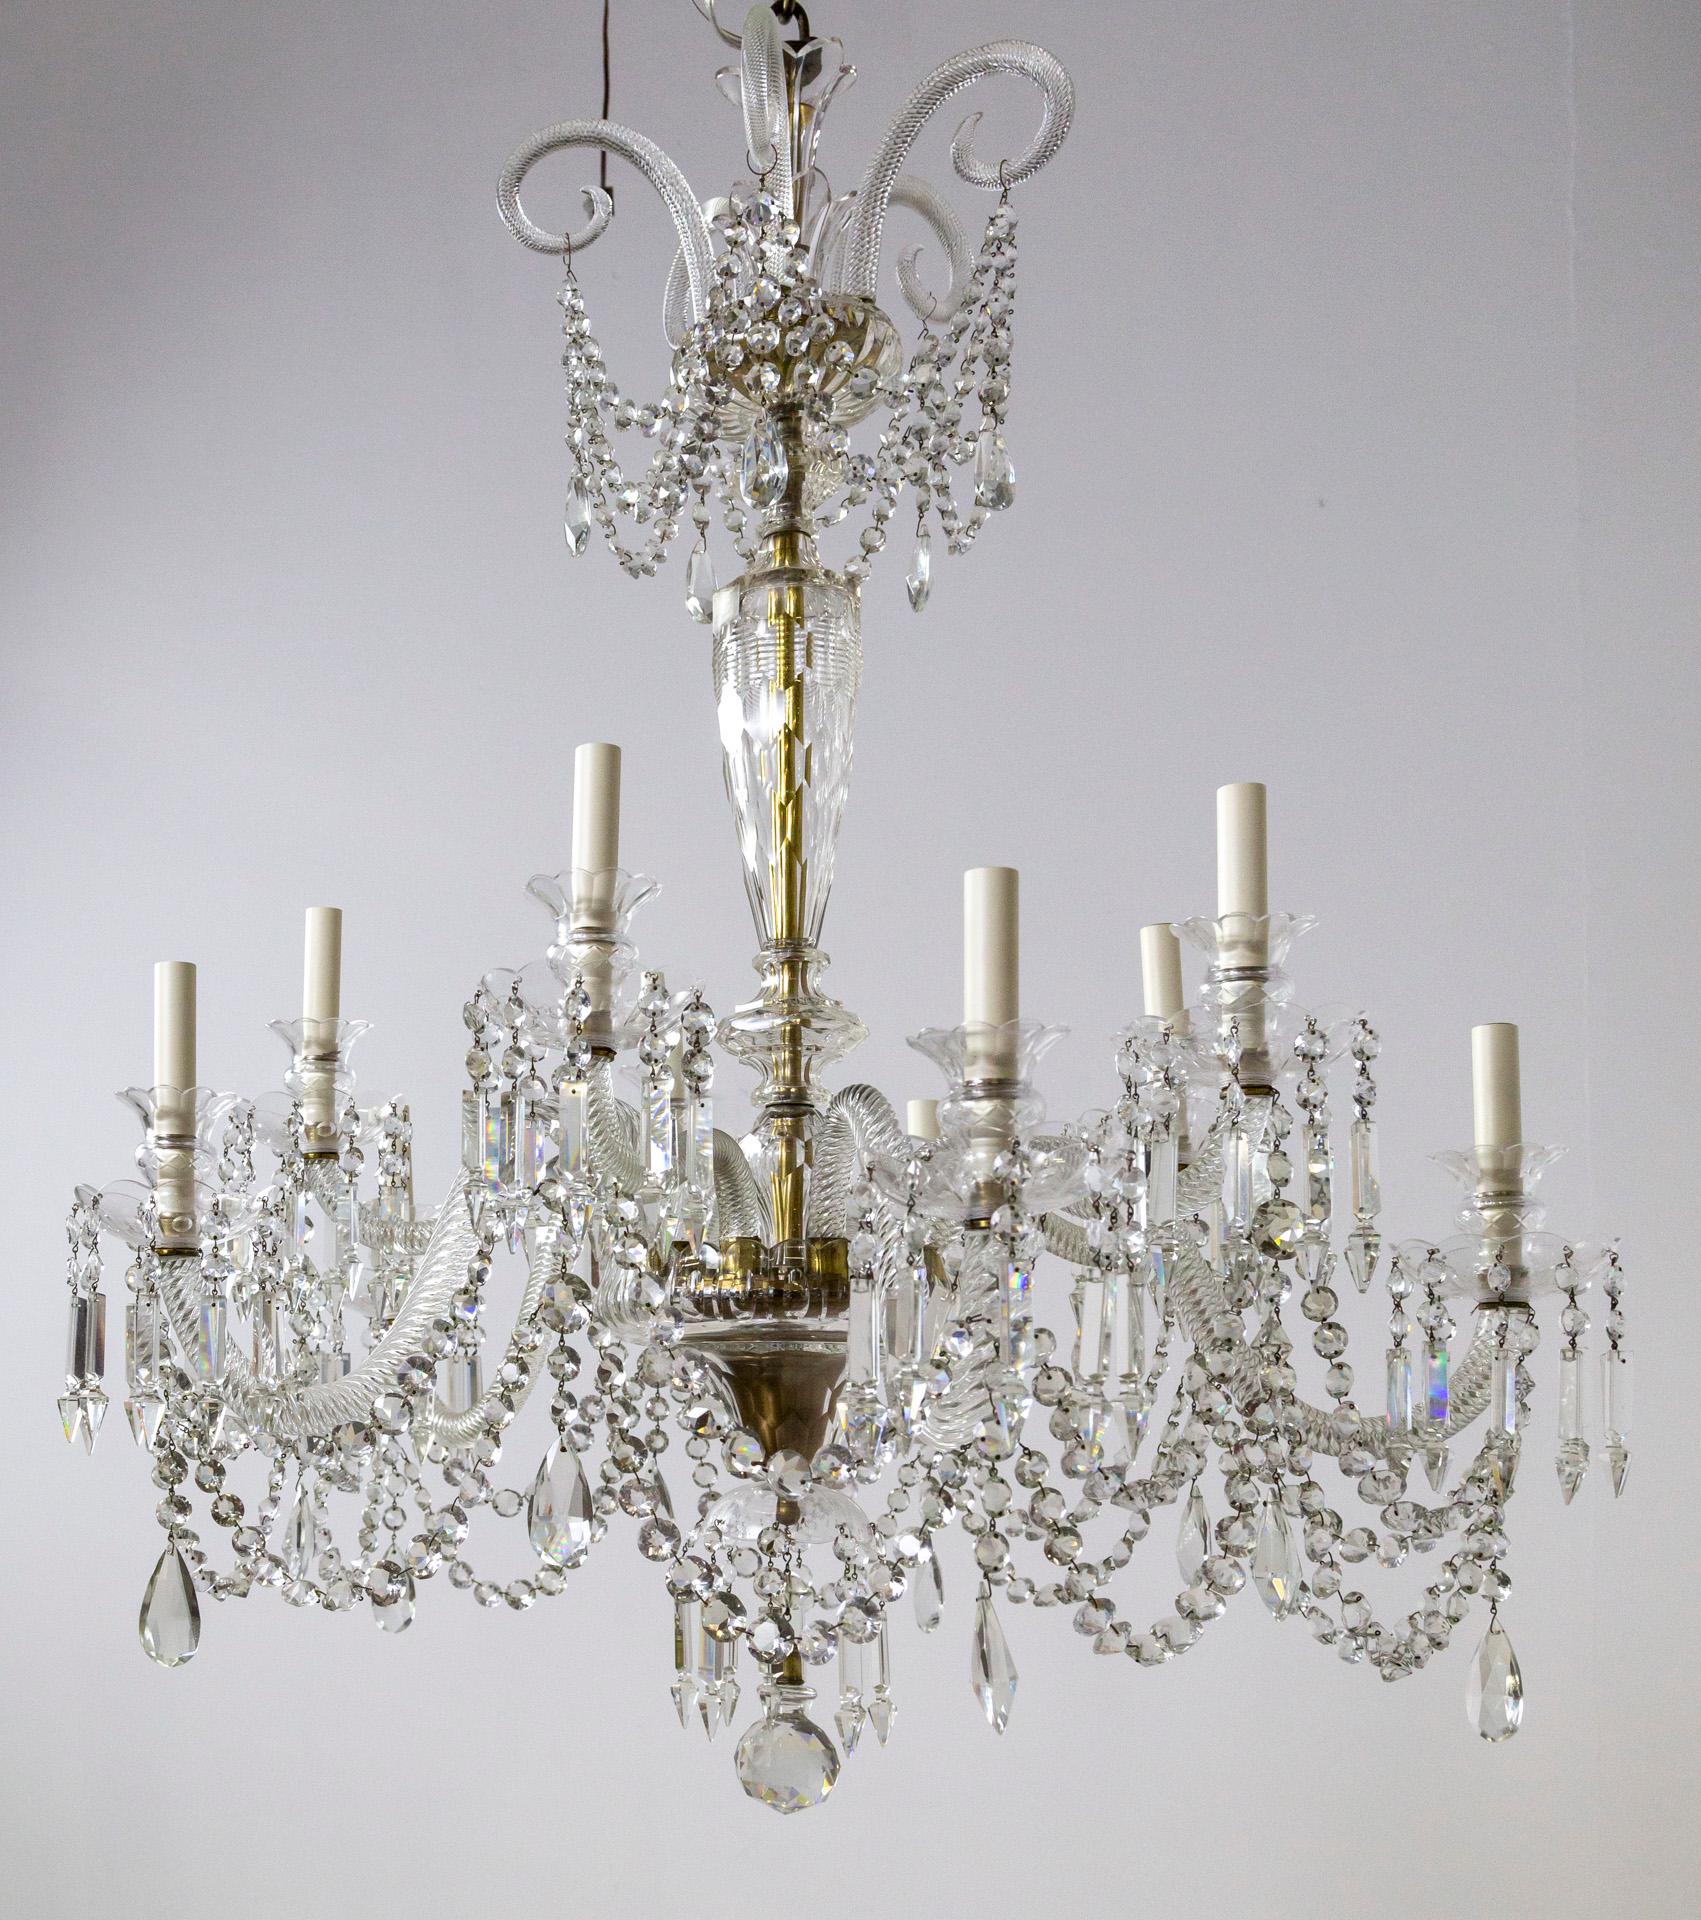 An exceptional Georgian style leaded crystal chandelier with 10 arms and four-foot length.  It was made in the UK in the early 20th century.  It has a complex, elegant design; a unique column with cut crystal 